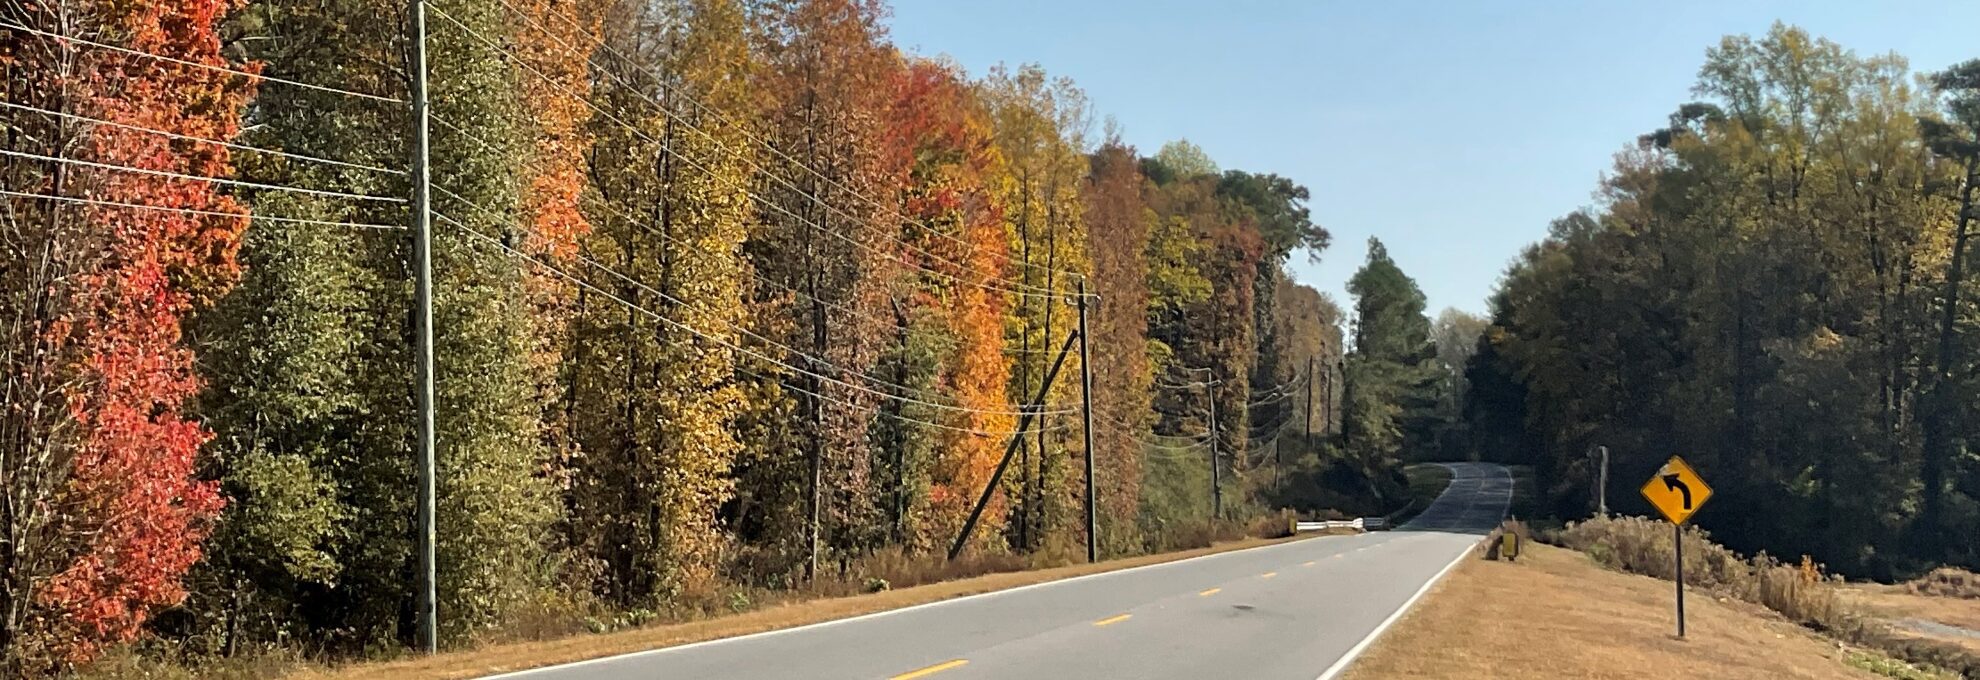 Kenansville (Fall Colors)